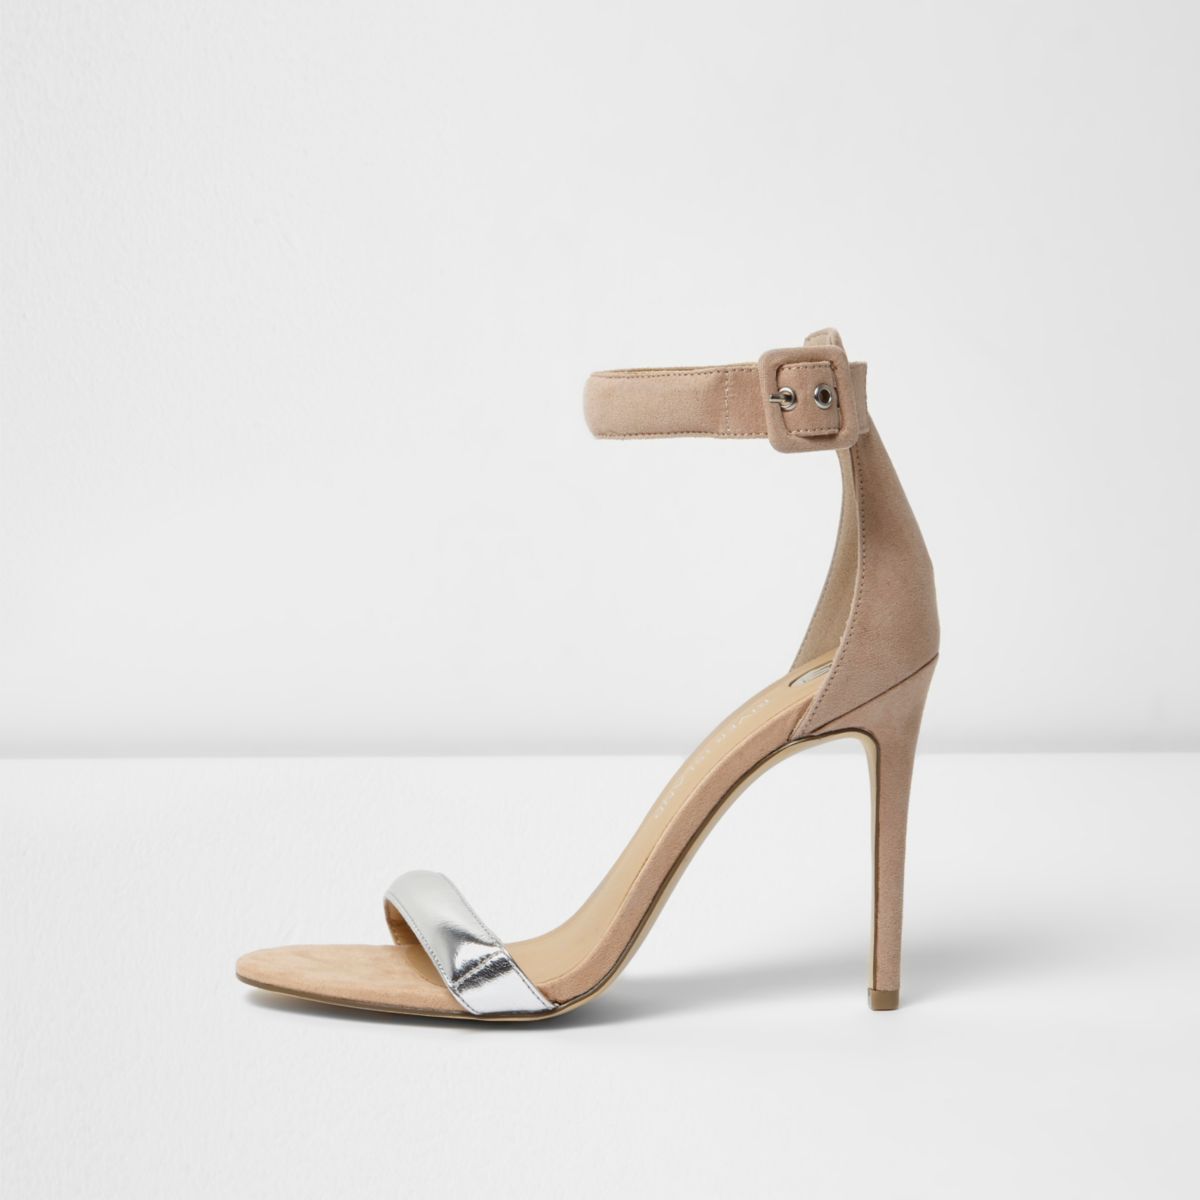 Nude Silver Strap Barely There Heeled Sandals - Shoes -8443